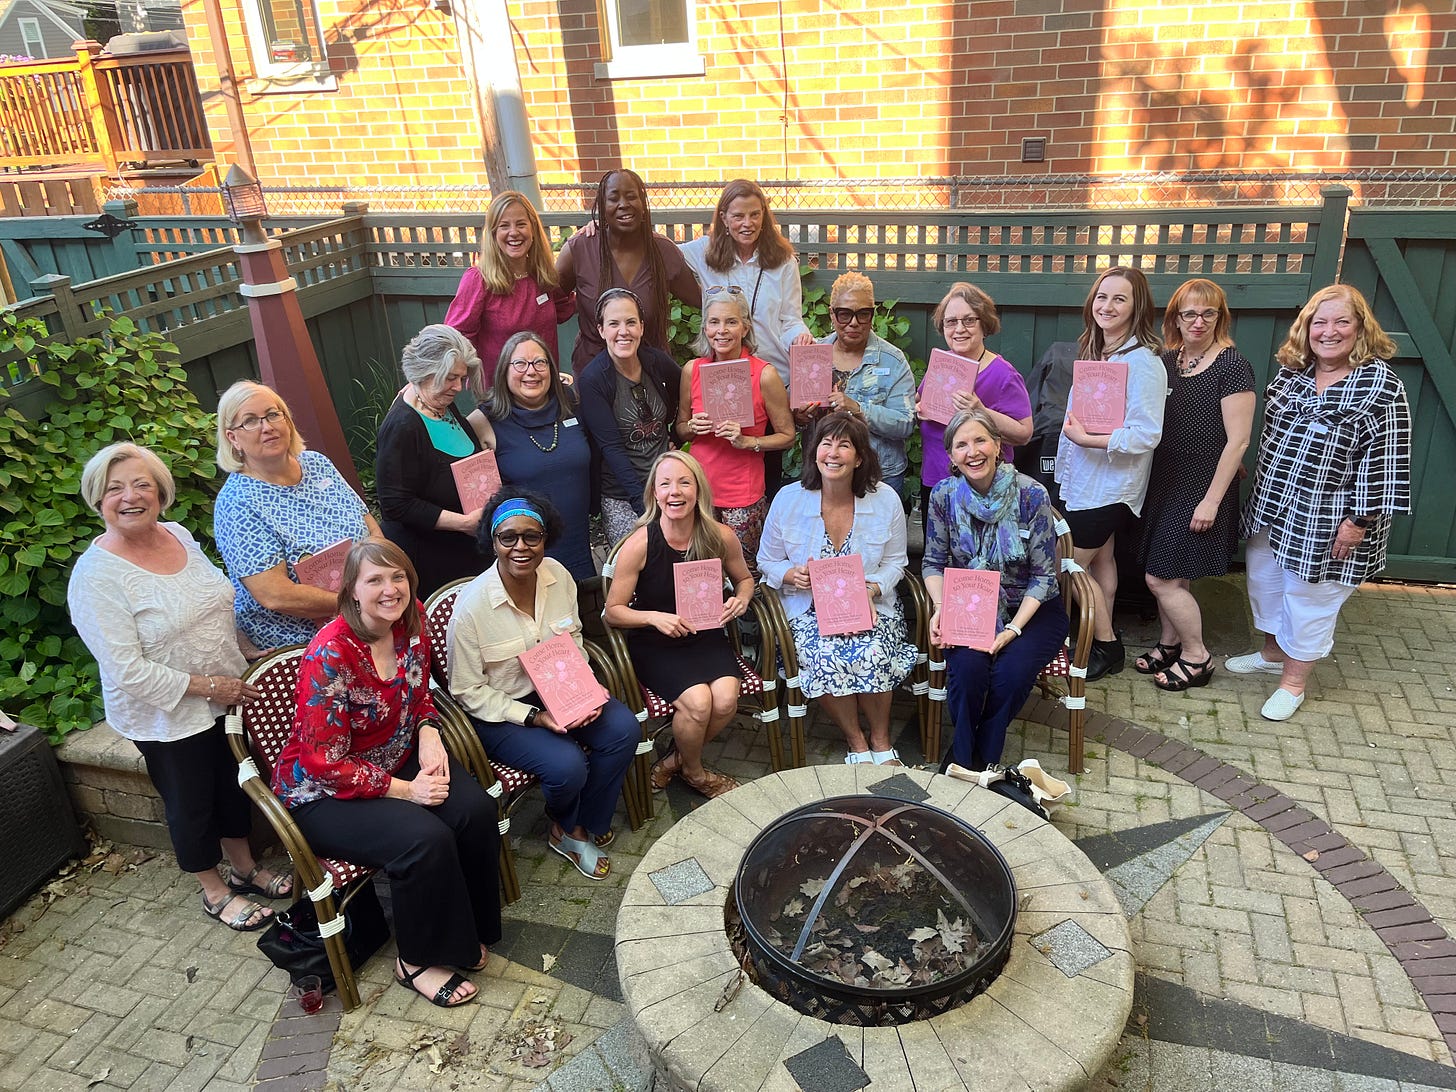 19 women gather in a backyard garden, holding books in honor of a new book release